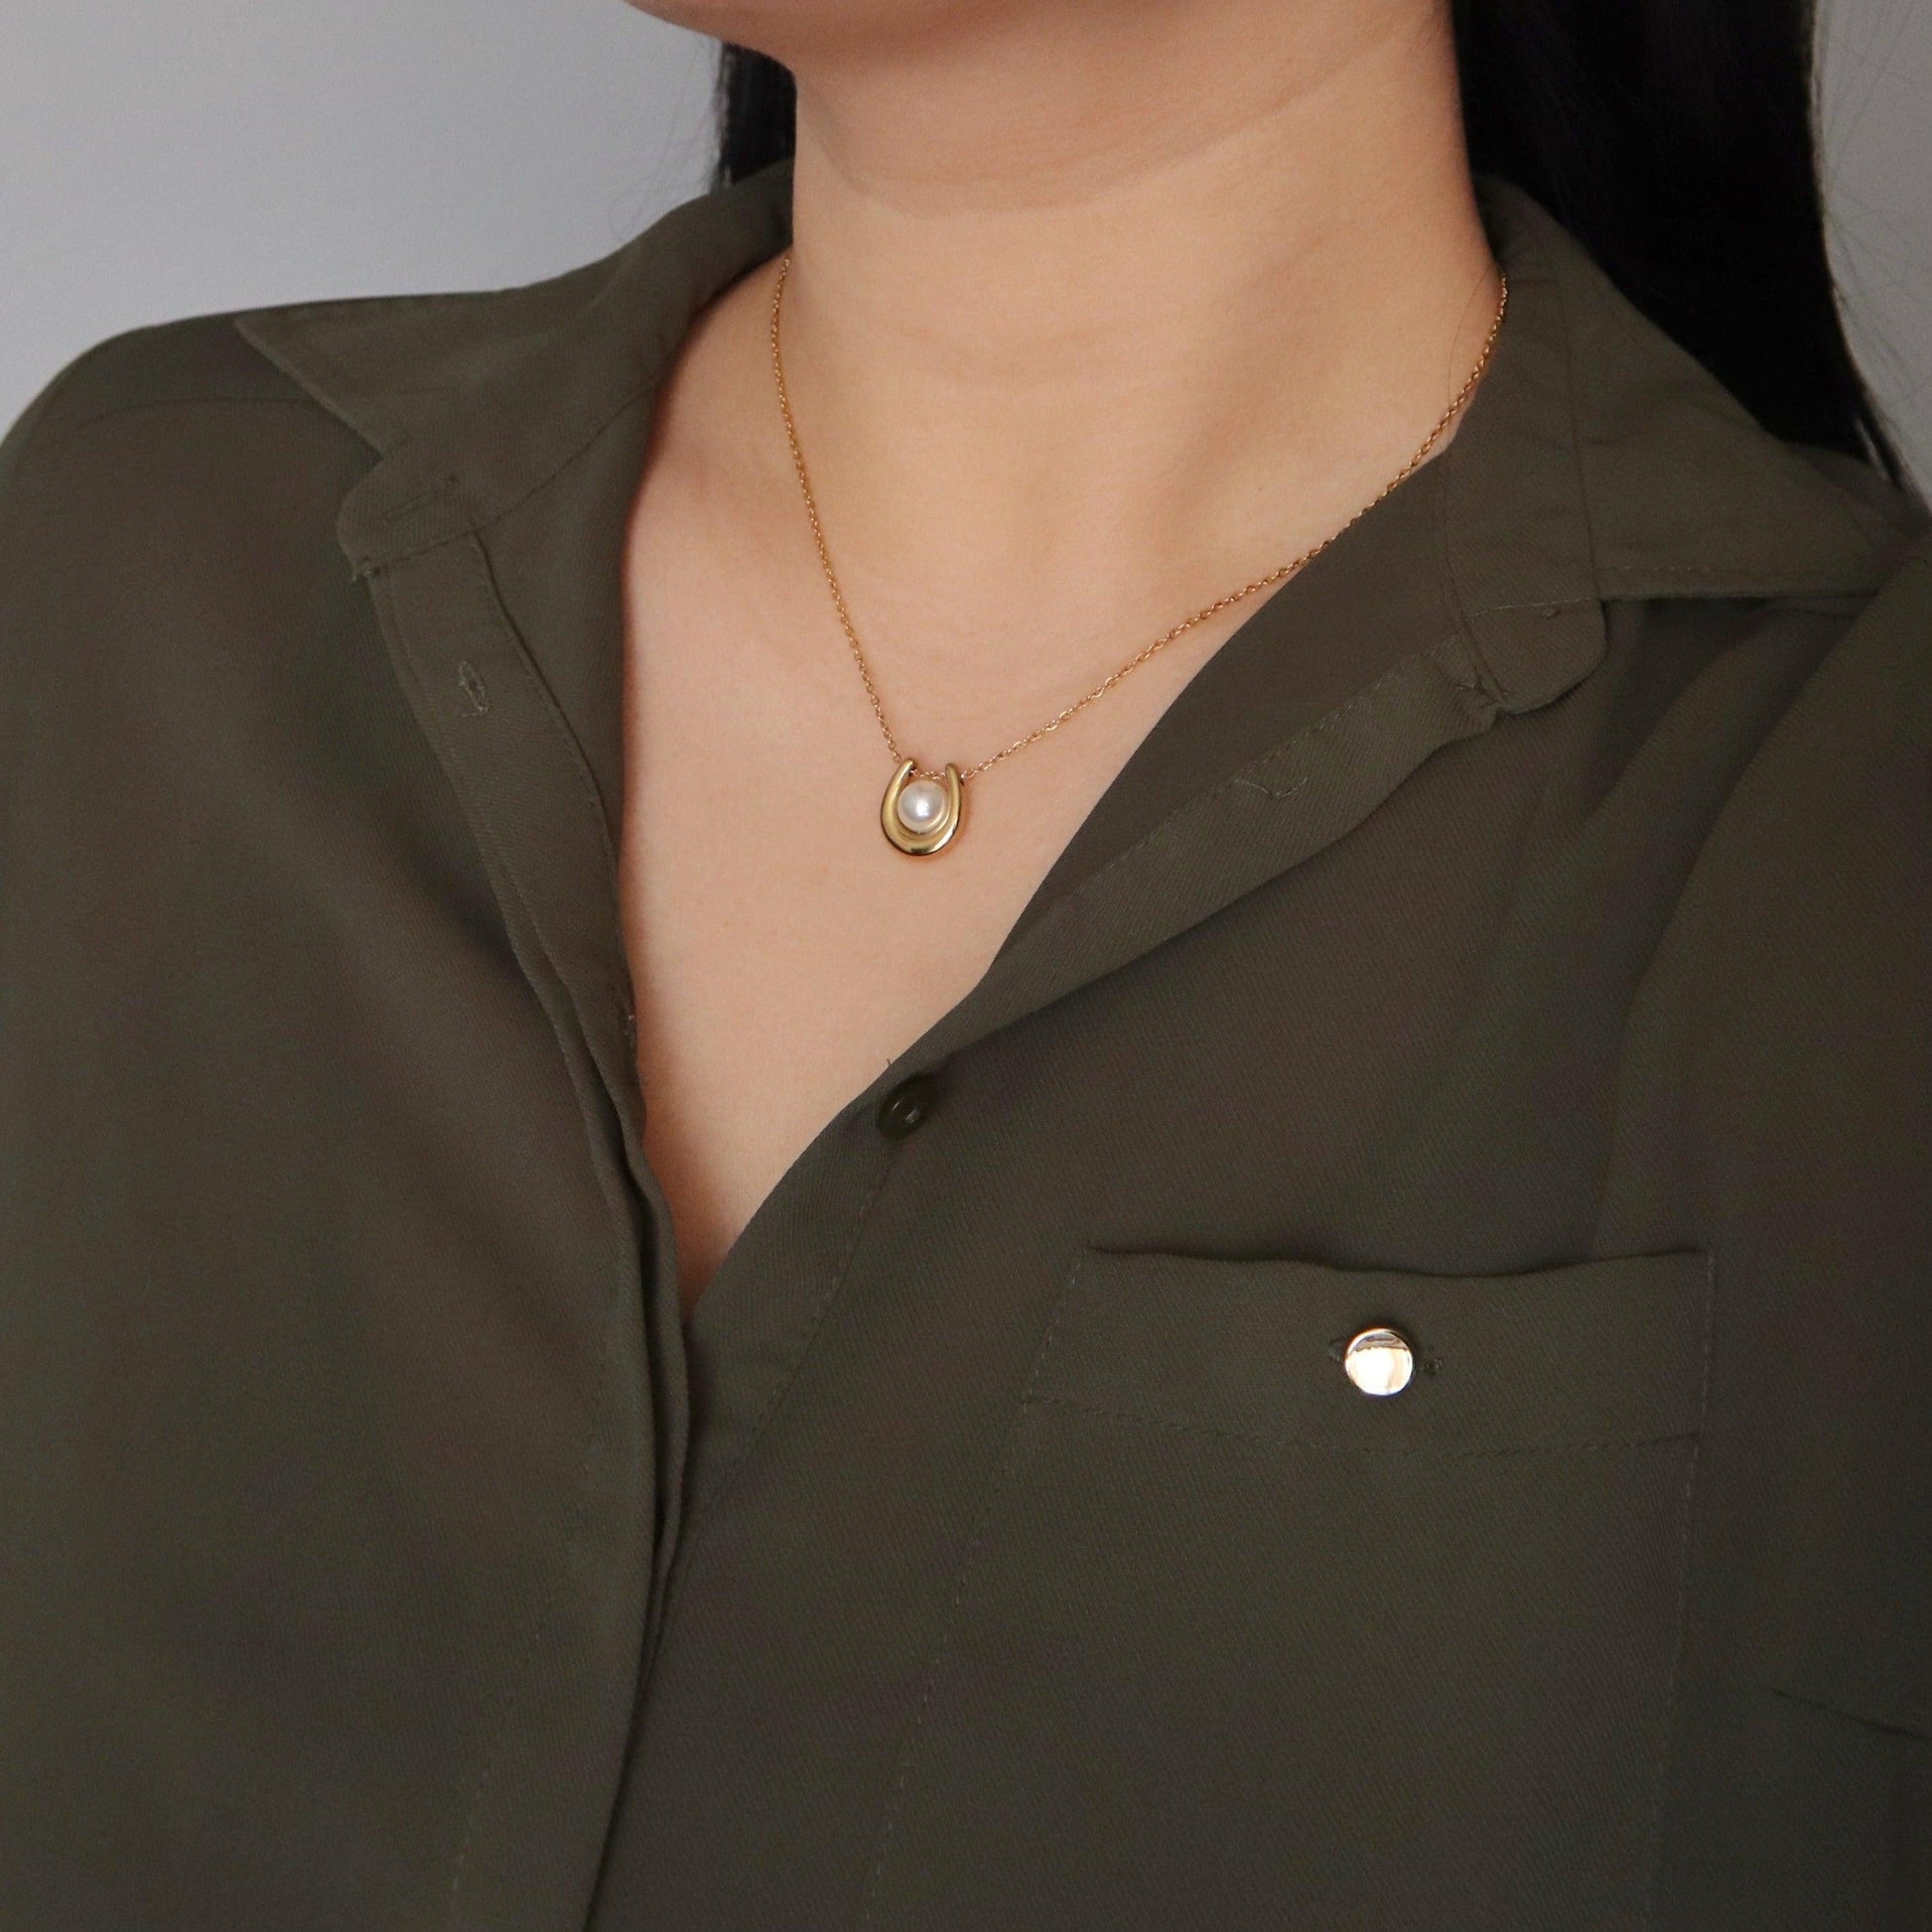 Ava Pearl Necklace | Pearl Pendant Necklace - JESSA JEWELRY | GOLD JEWELRY; dainty, affordable gold everyday jewelry. Tarnish free, water-resistant, hypoallergenic. Jewelry for everyday wear